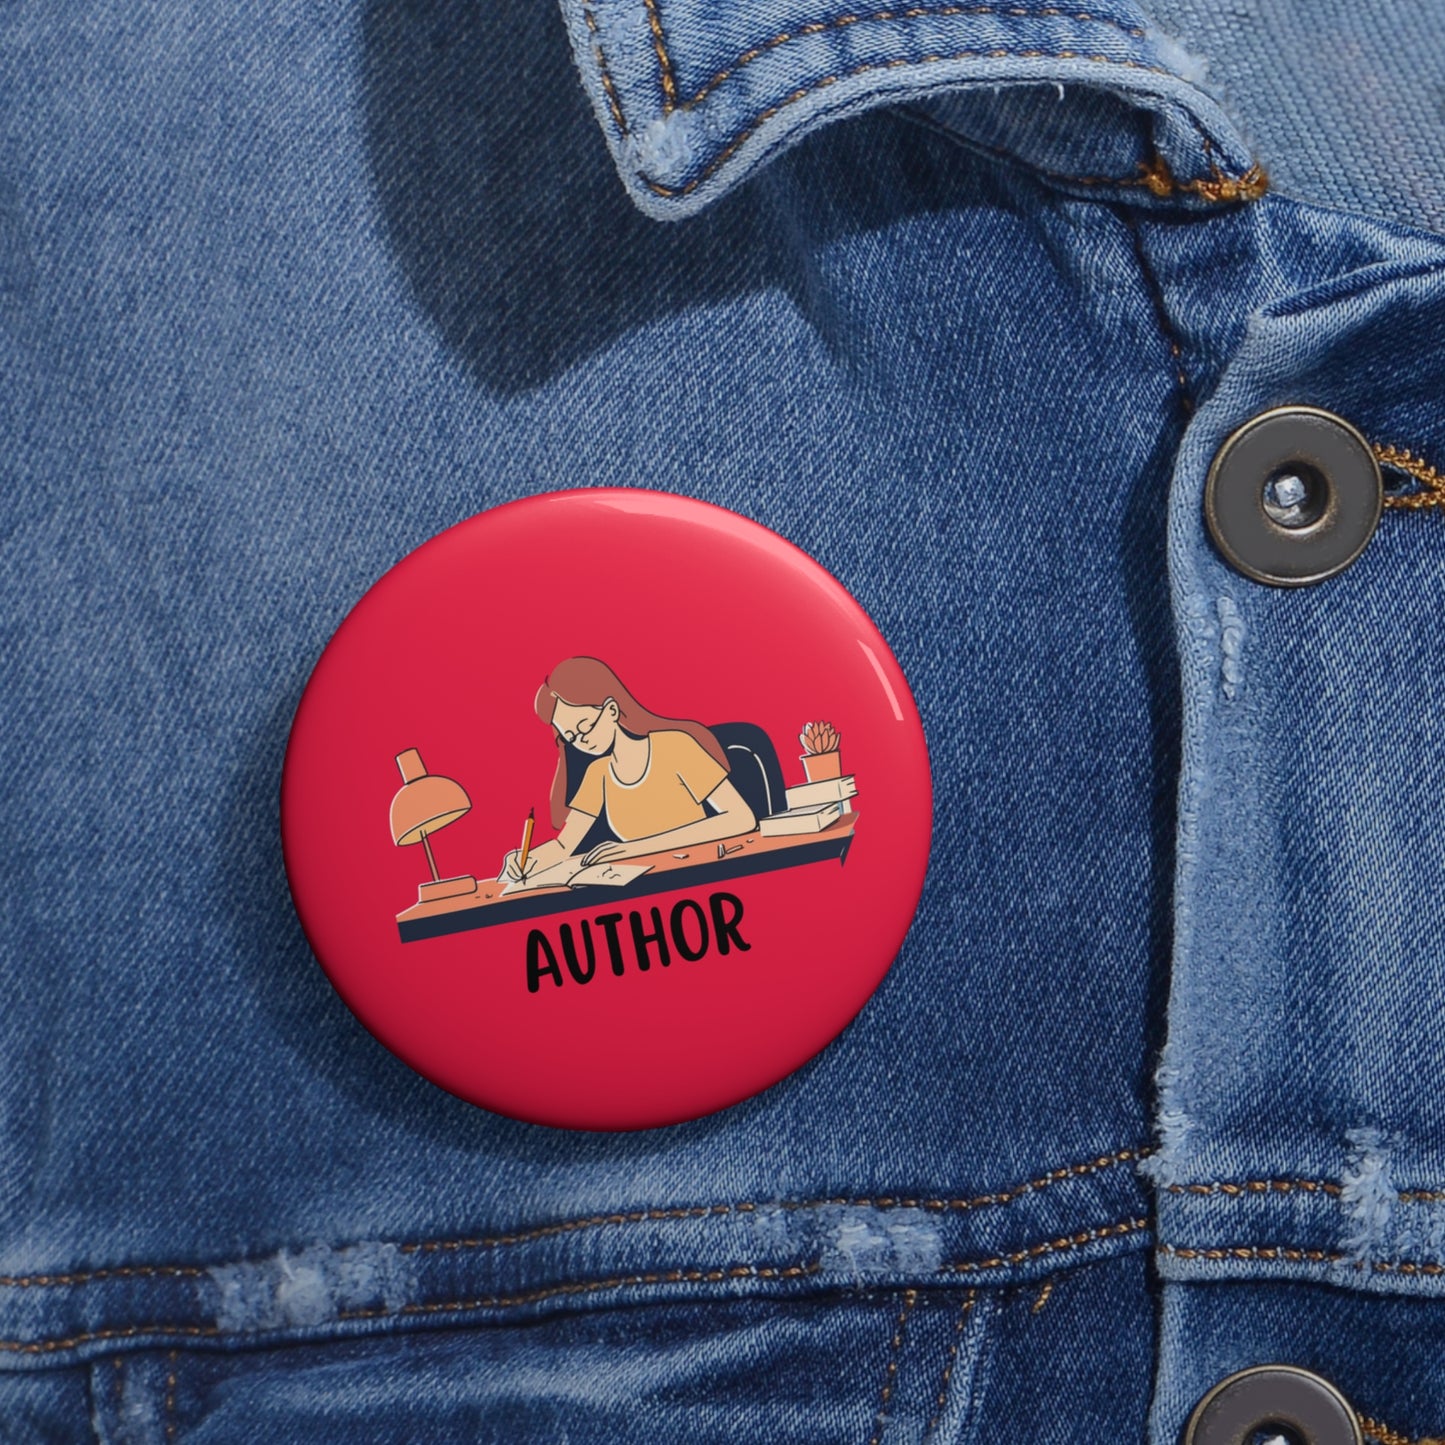 Author Pin, Author Pinback Button, Author Gifts, Writer Pin, Writer Pinback Button, Writer Gift, Author of Books Gifts, Gifts Author Brooch